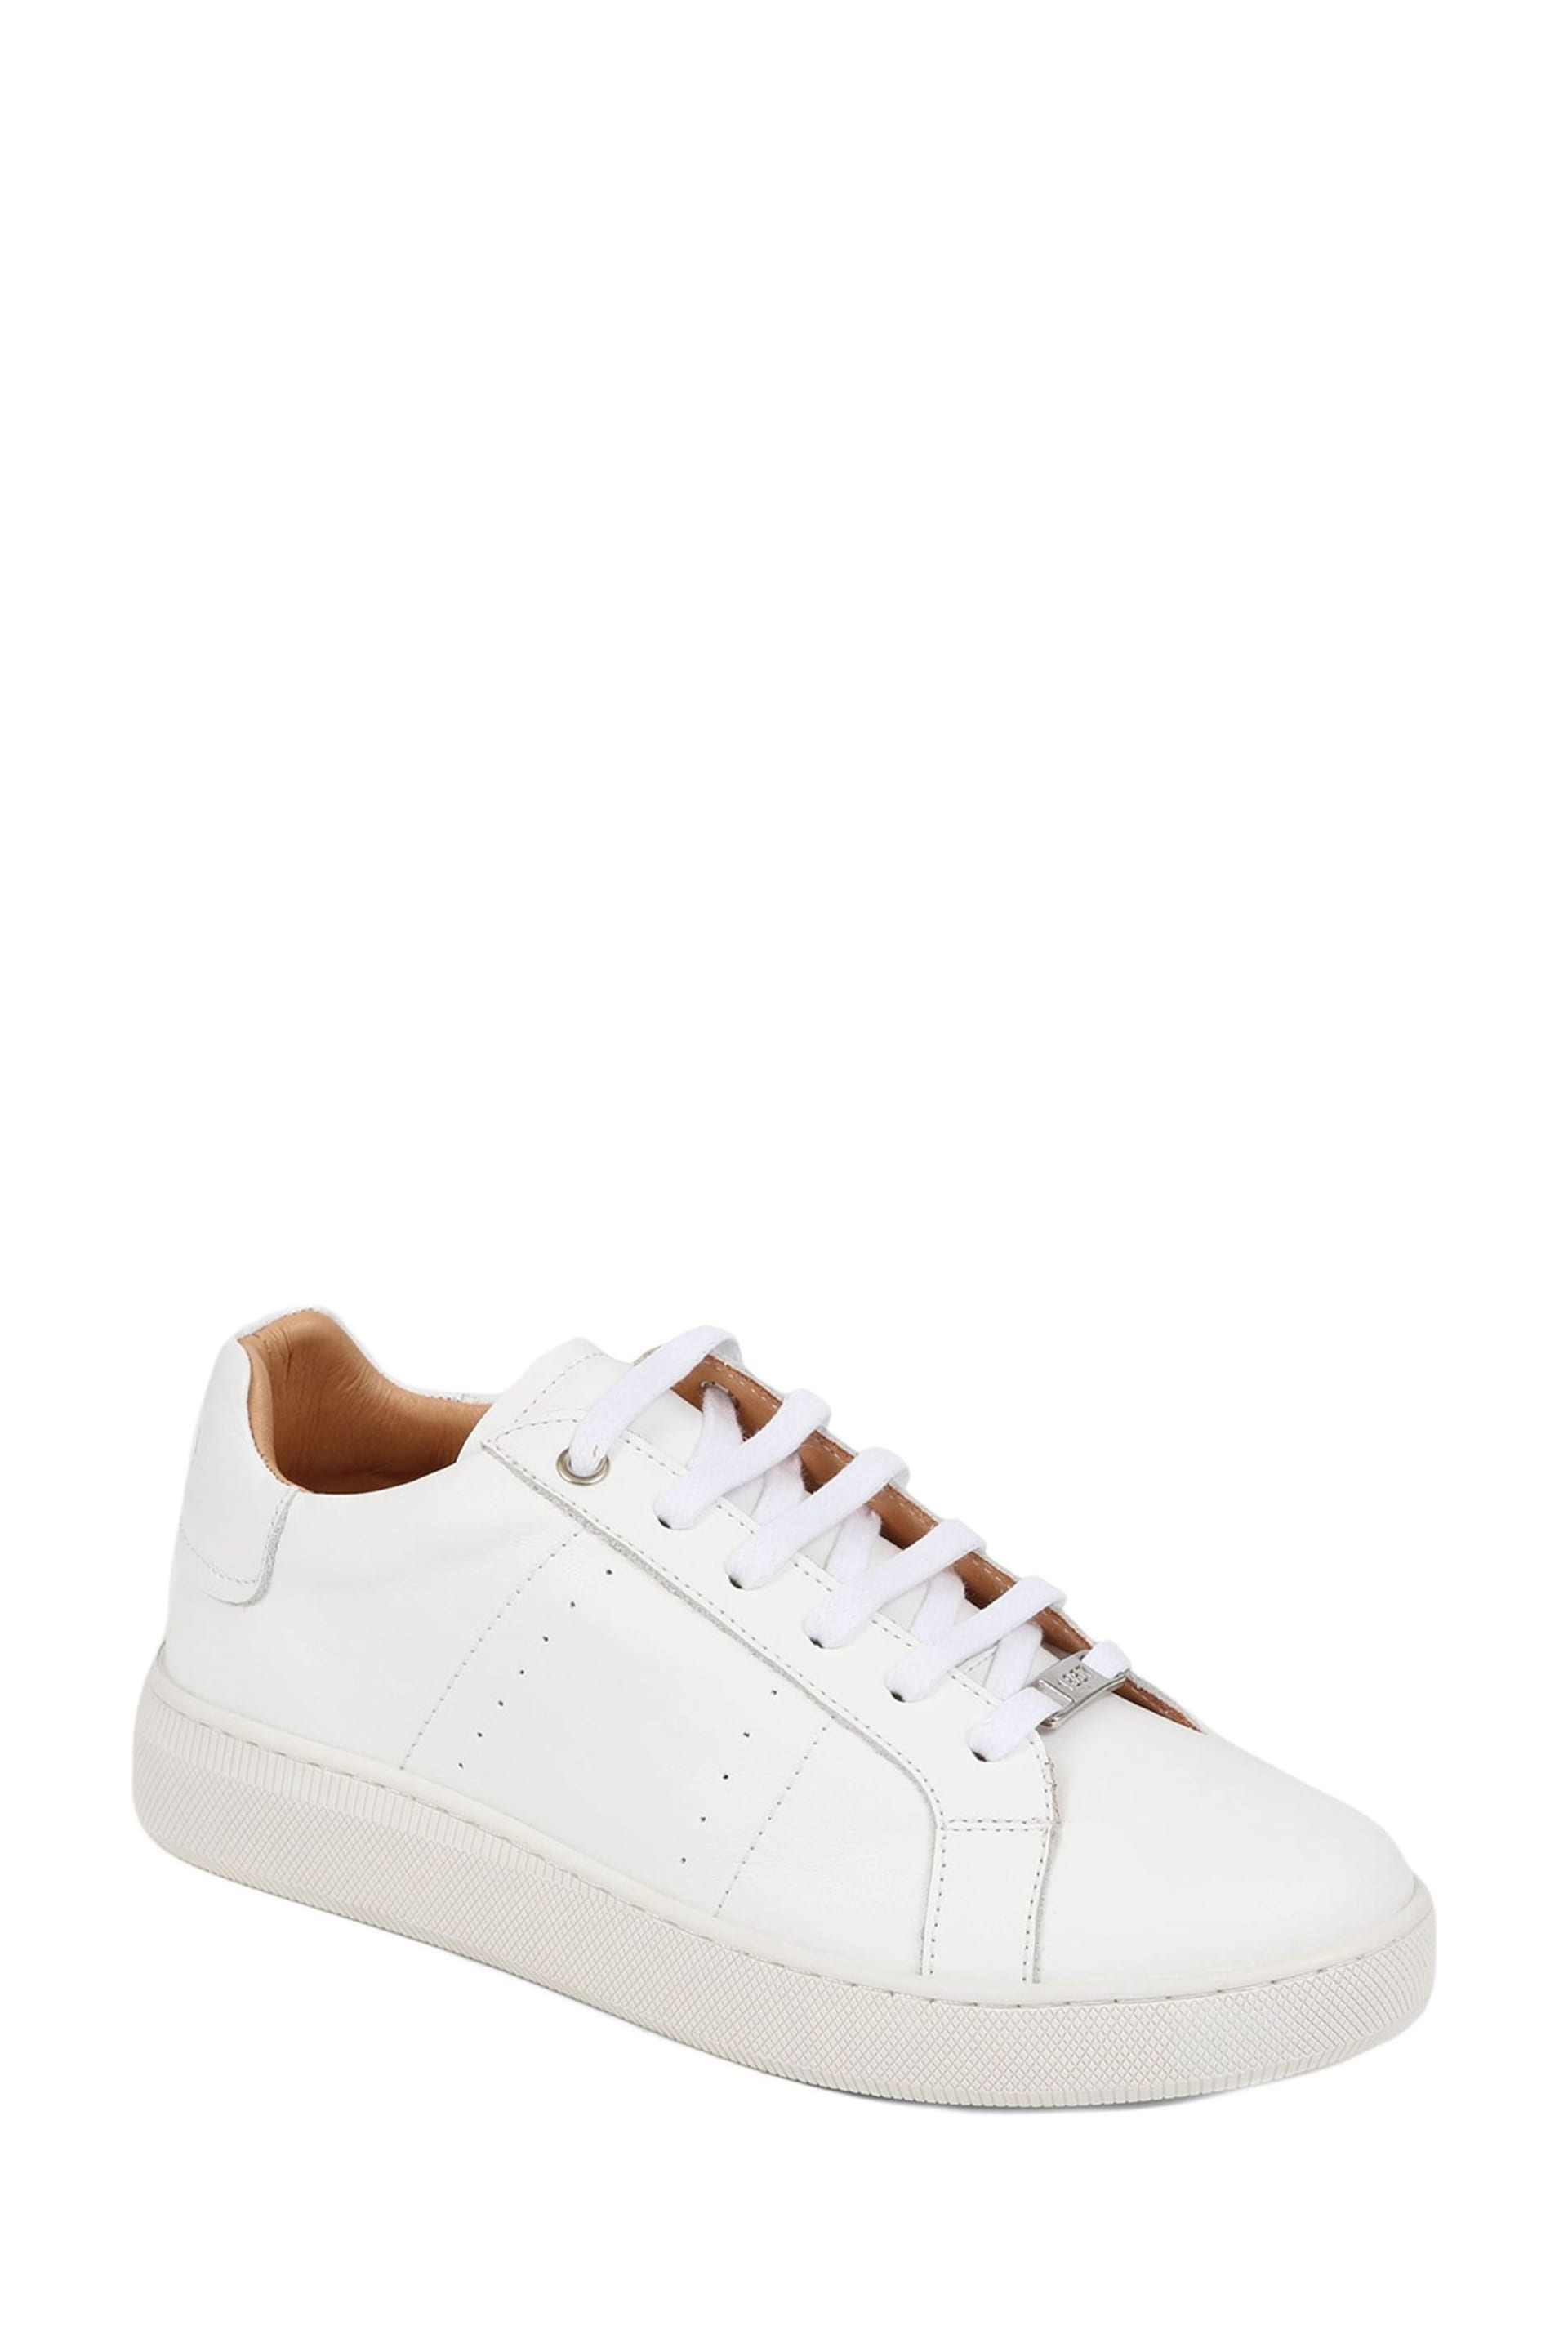 Jones Bootmaker Bernie Lace-Up White Trainers - Image 3 of 5